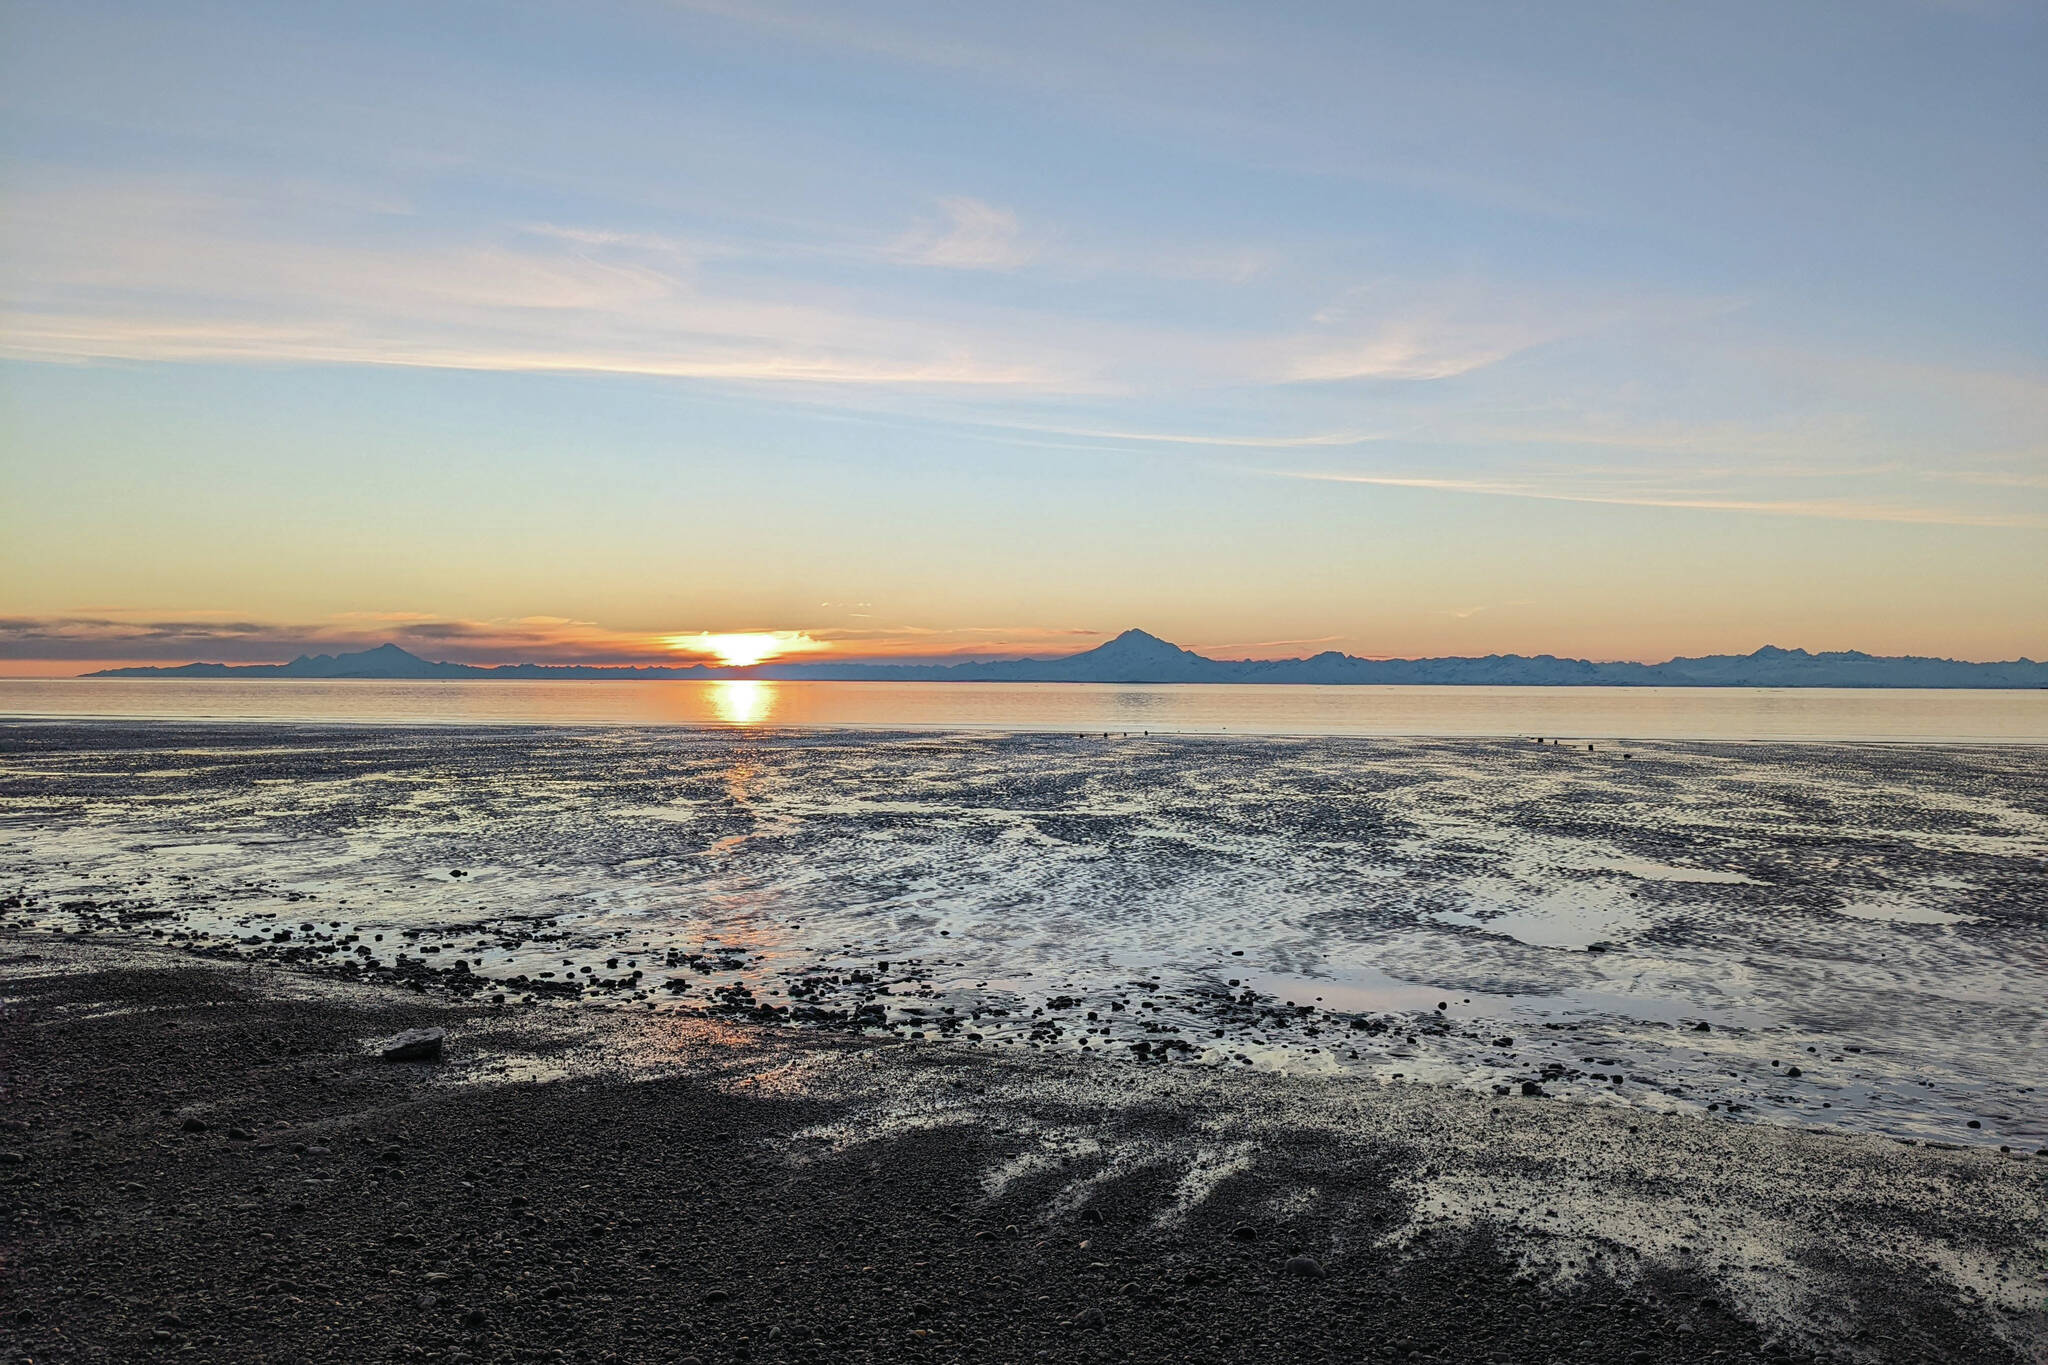 Mounts Iliamna and Redoubt are seen at sunset on Feb. 22, 2022, in Kenai, Alaska. (Photo by Erin Thompson/Peninsula Clarion)